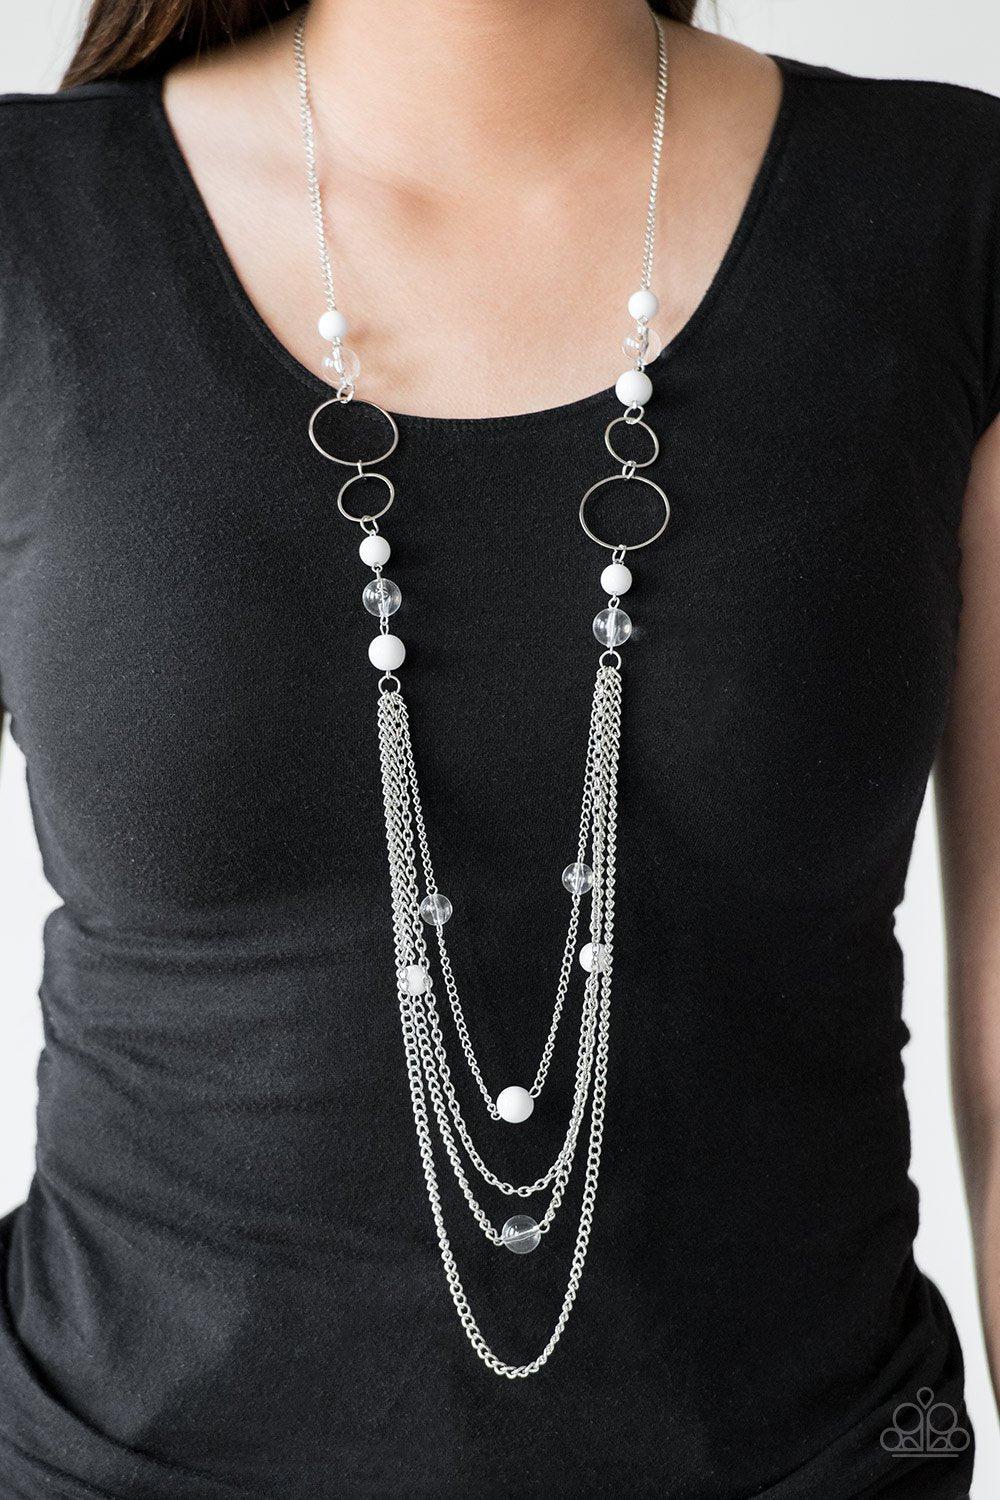 Bubbly Bright White and Silver Necklace - Paparazzi Accessories - model -CarasShop.com - $5 Jewelry by Cara Jewels